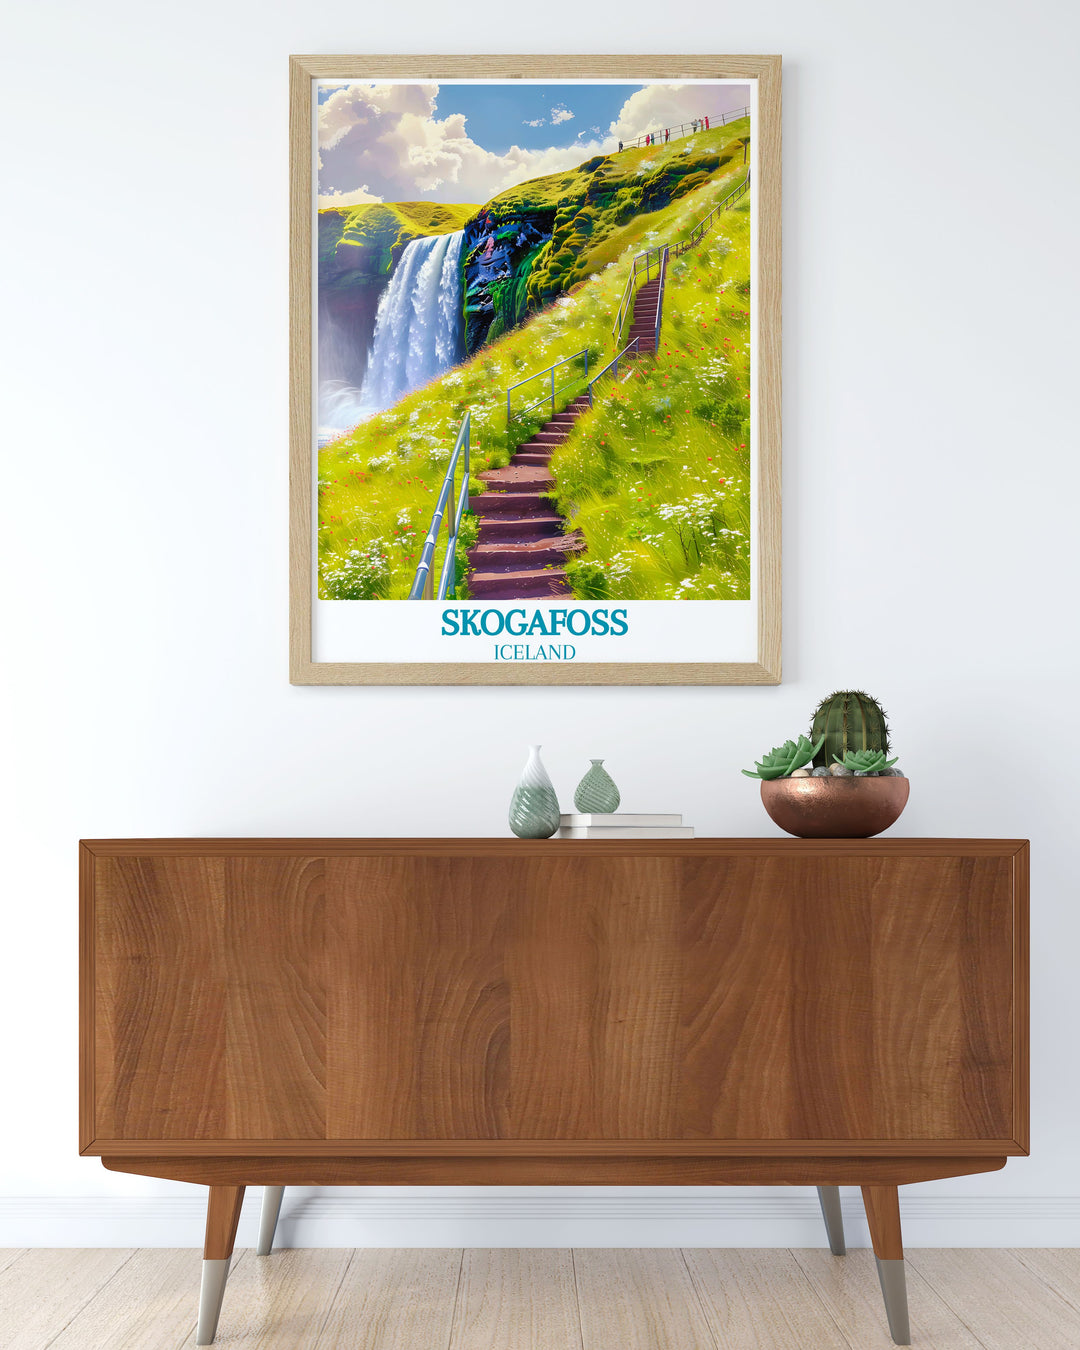 Capture the serene beauty of Skogafoss and its hiking trail with this art print, highlighting the powerful cascade and the lush, vibrant scenery.